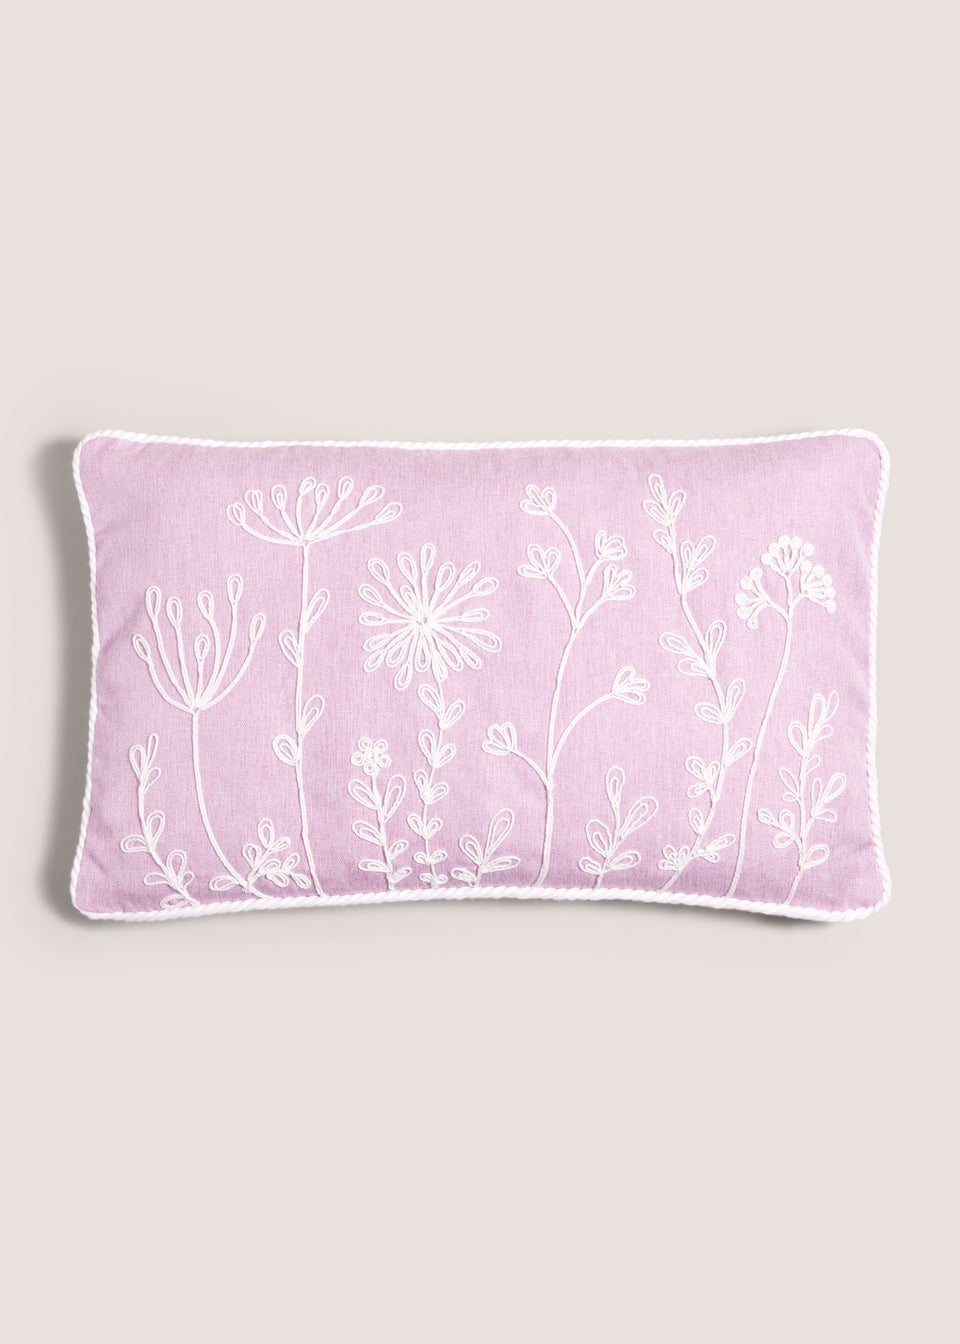 Lilac Floral Embroidered Cushion (30cm x 50cm)